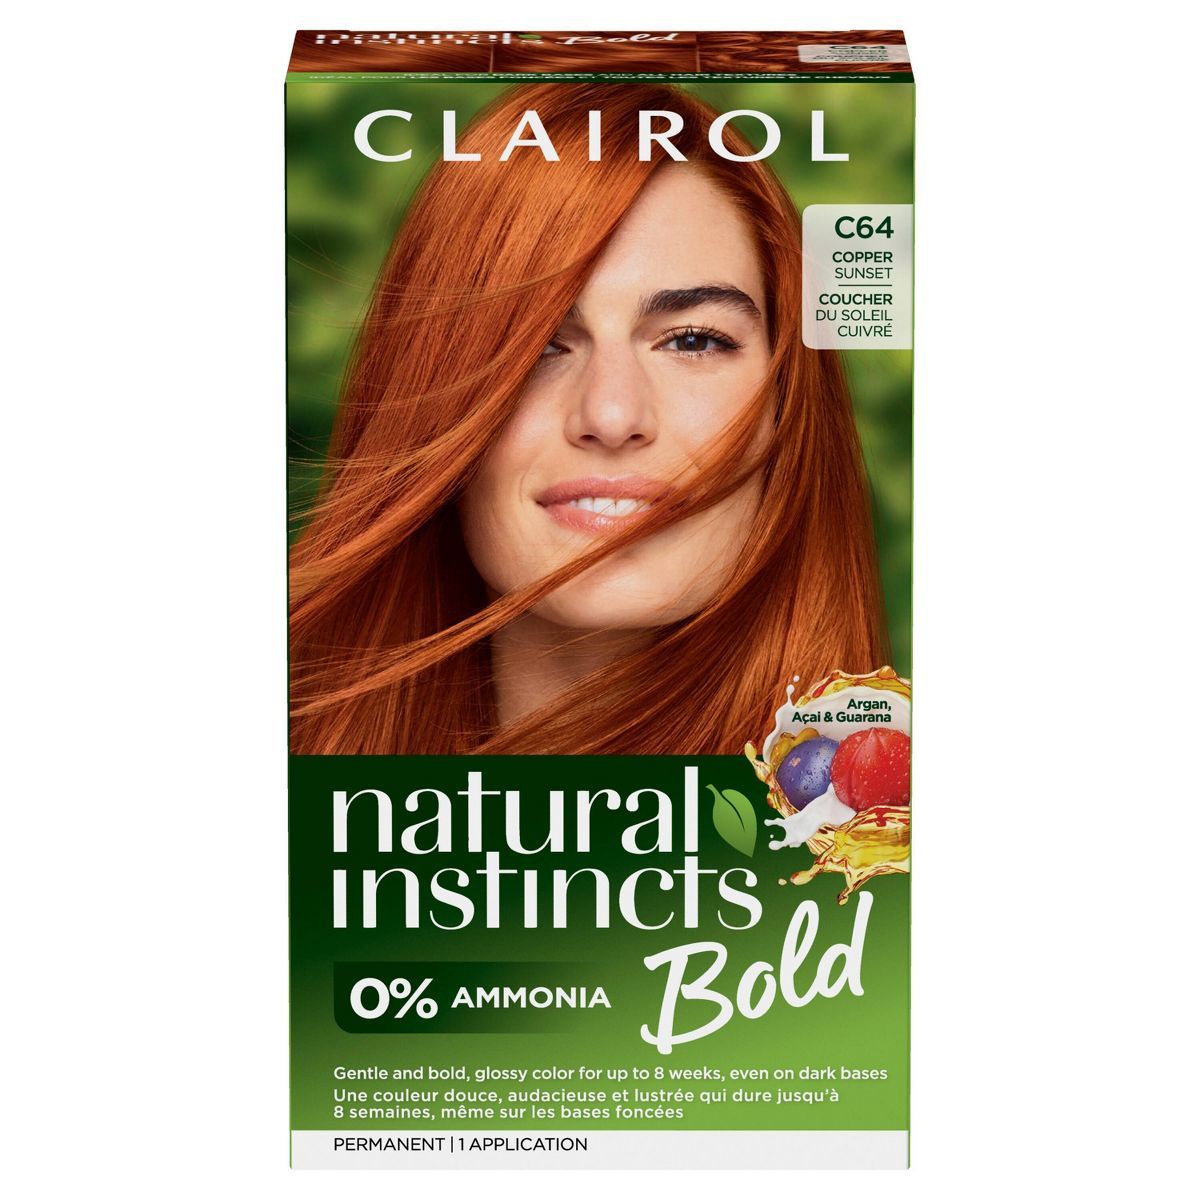 Natural Instincts Clairol Permanent Hair Color Bold Kit | Target